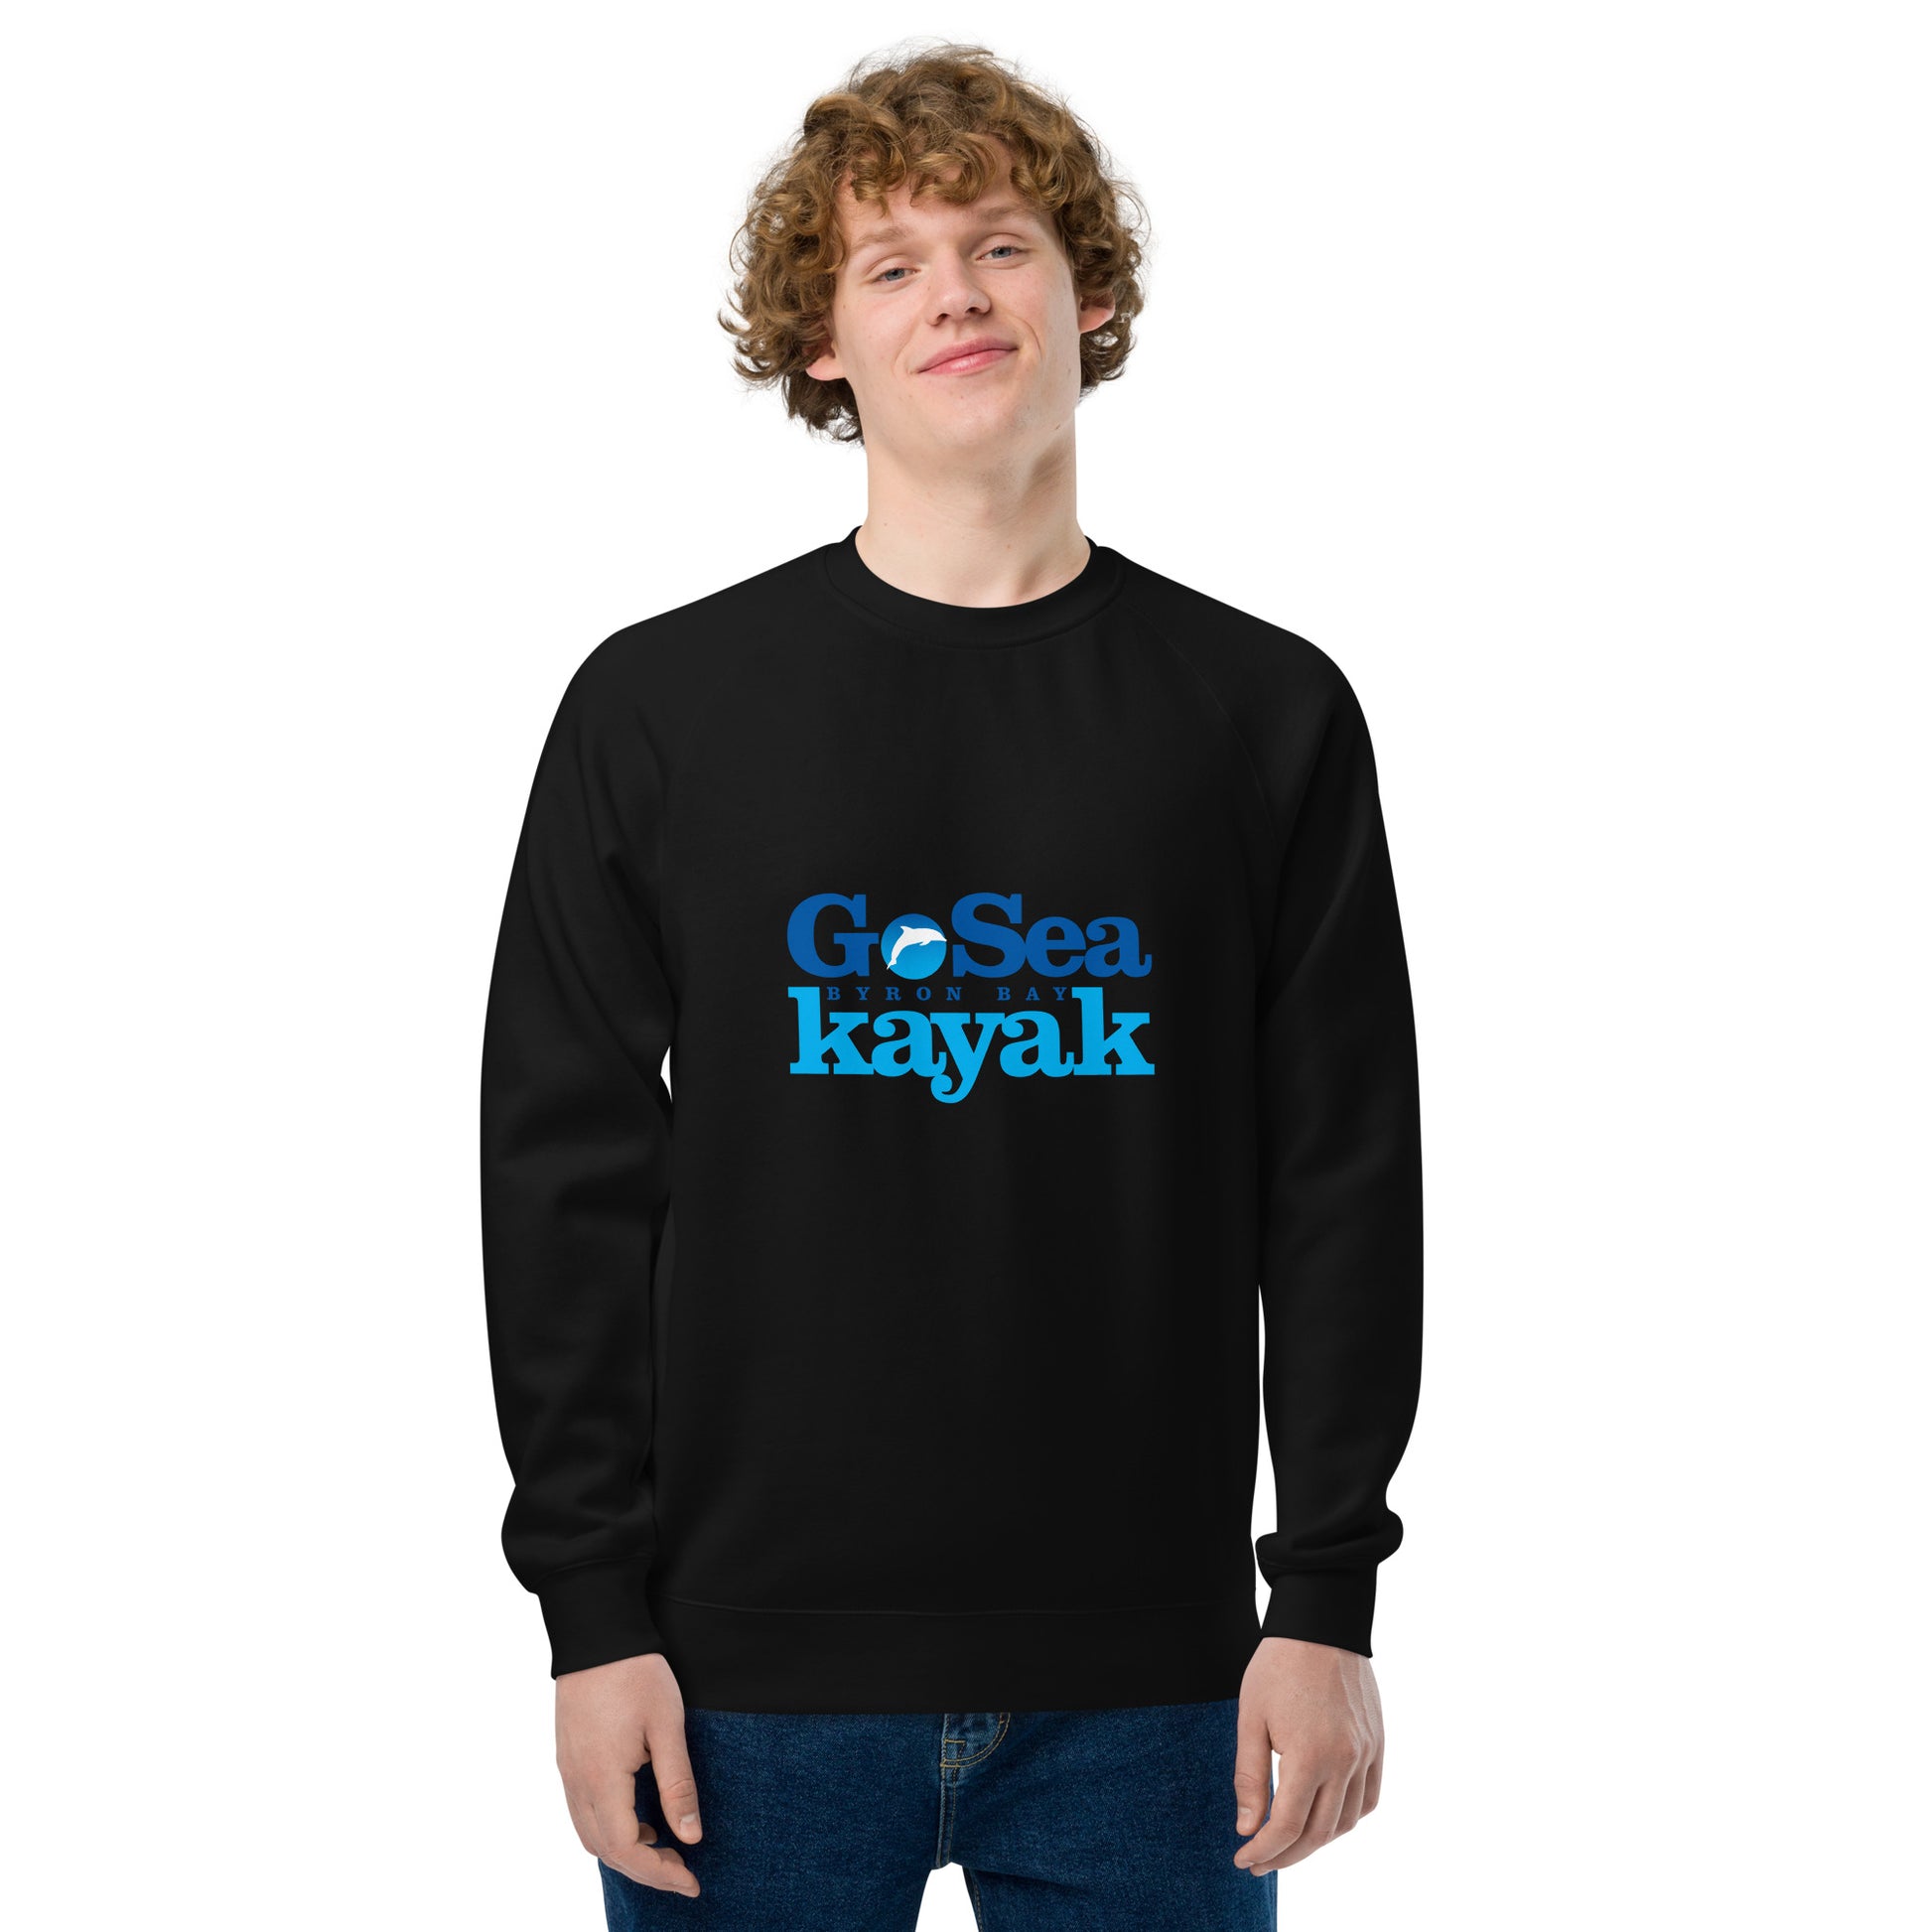  Unisex Sweatshirt - Black - Front view being warn by man with arms by side - Go Sea Kayak Byron Bay logo on front - Genuine Byron Bay Merchandise | Produced by Go Sea Kayak Byron Bay 